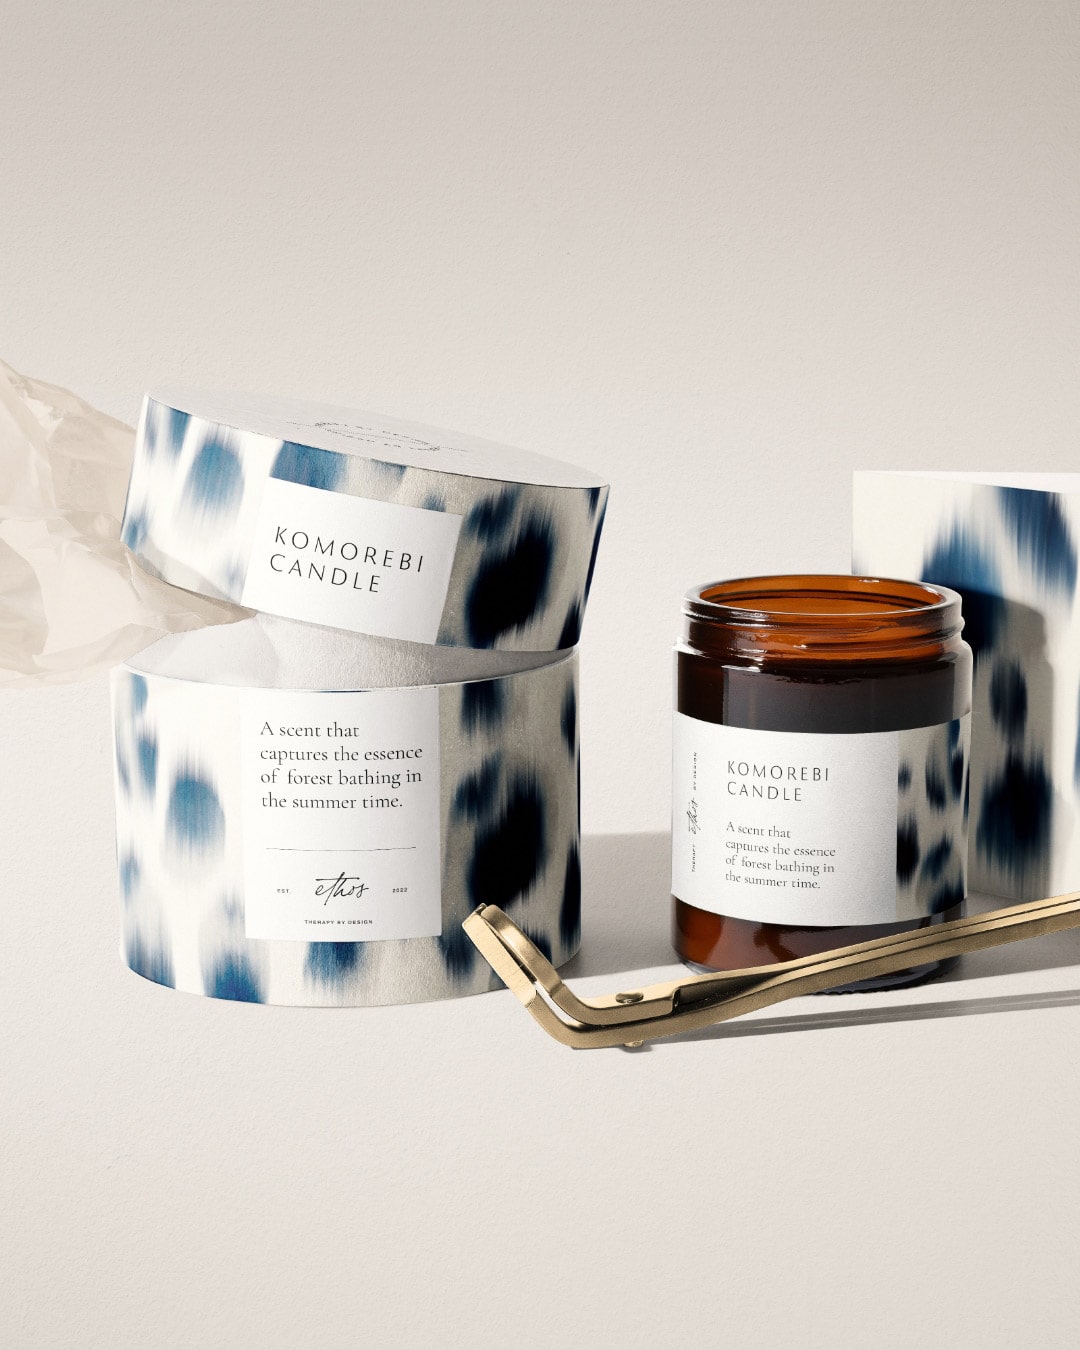 Modern Candle brand identity and packaging| Premade Brand Kit for